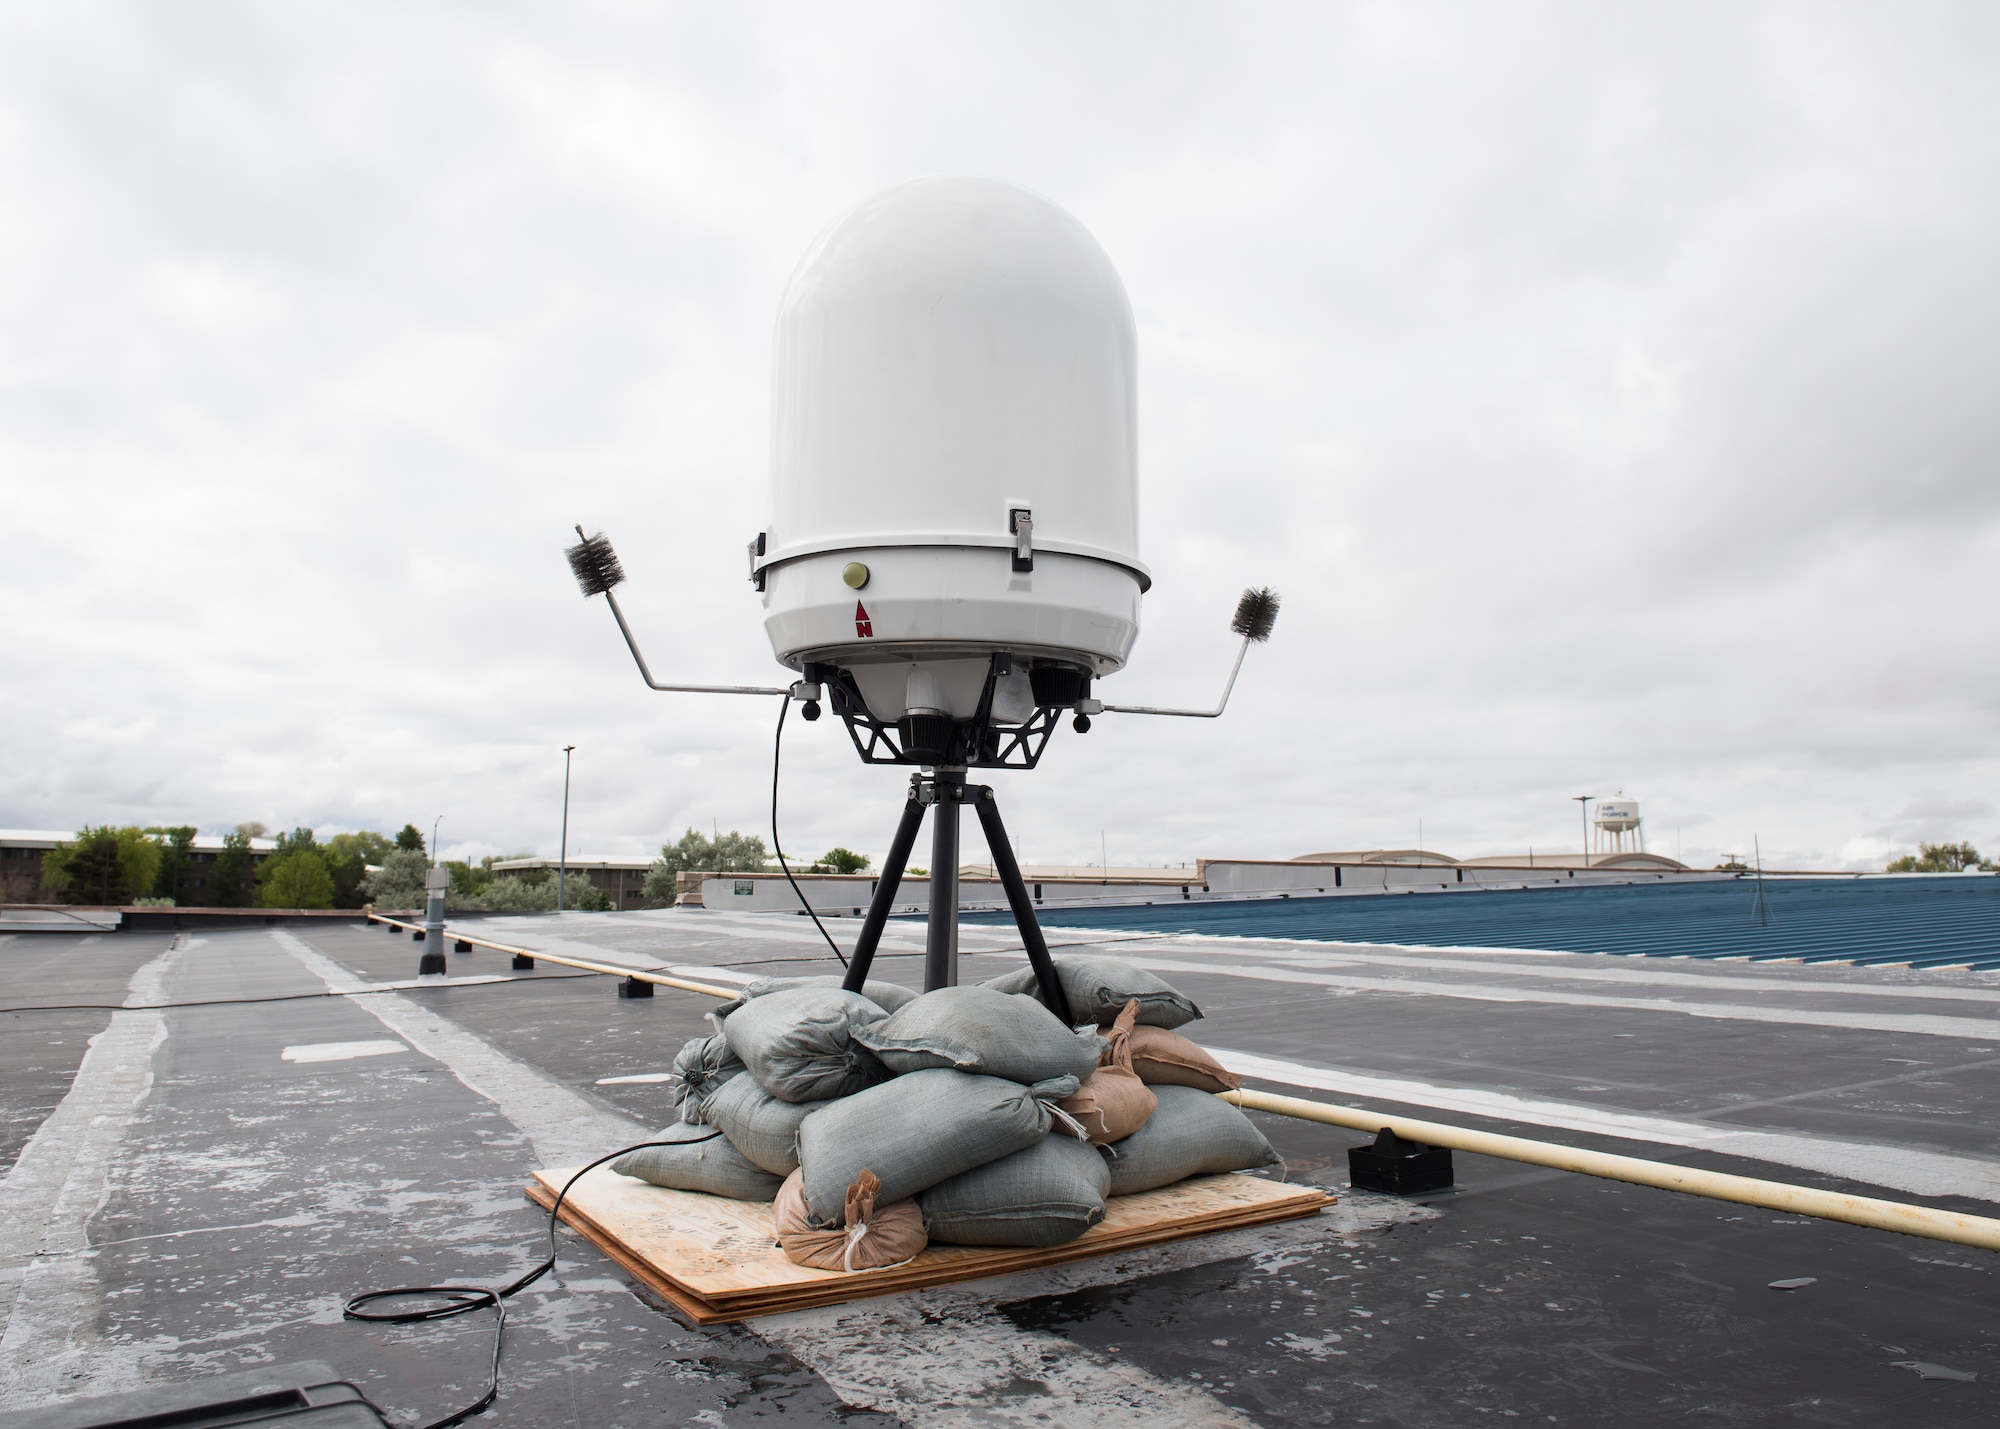 A Portable Doppler Radar provides weather surveillance May 25, 2019, at Mountain Home Air Force Base, Idaho. The is the first time the Doppler system has been installed on a Continental United States base. (U.S. Air Force photo by Senior Airman Tyrell Hall)